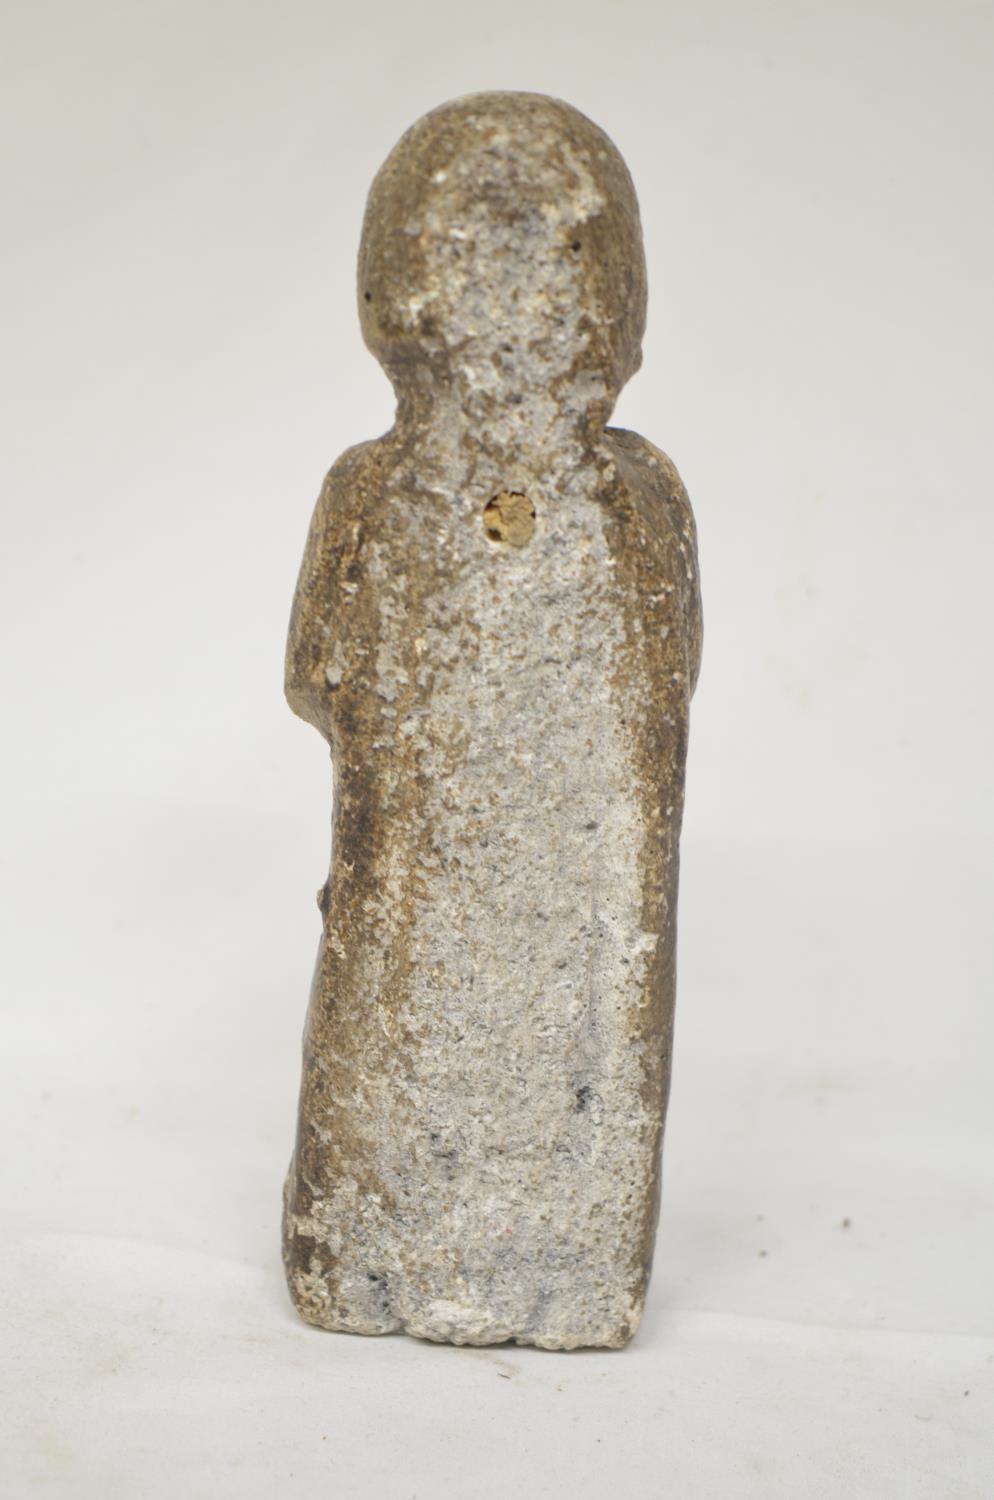 Stone carved Romanesque saintly figure, circa 11th-12th century. H19cm (Victor Brox collection) - Image 3 of 5